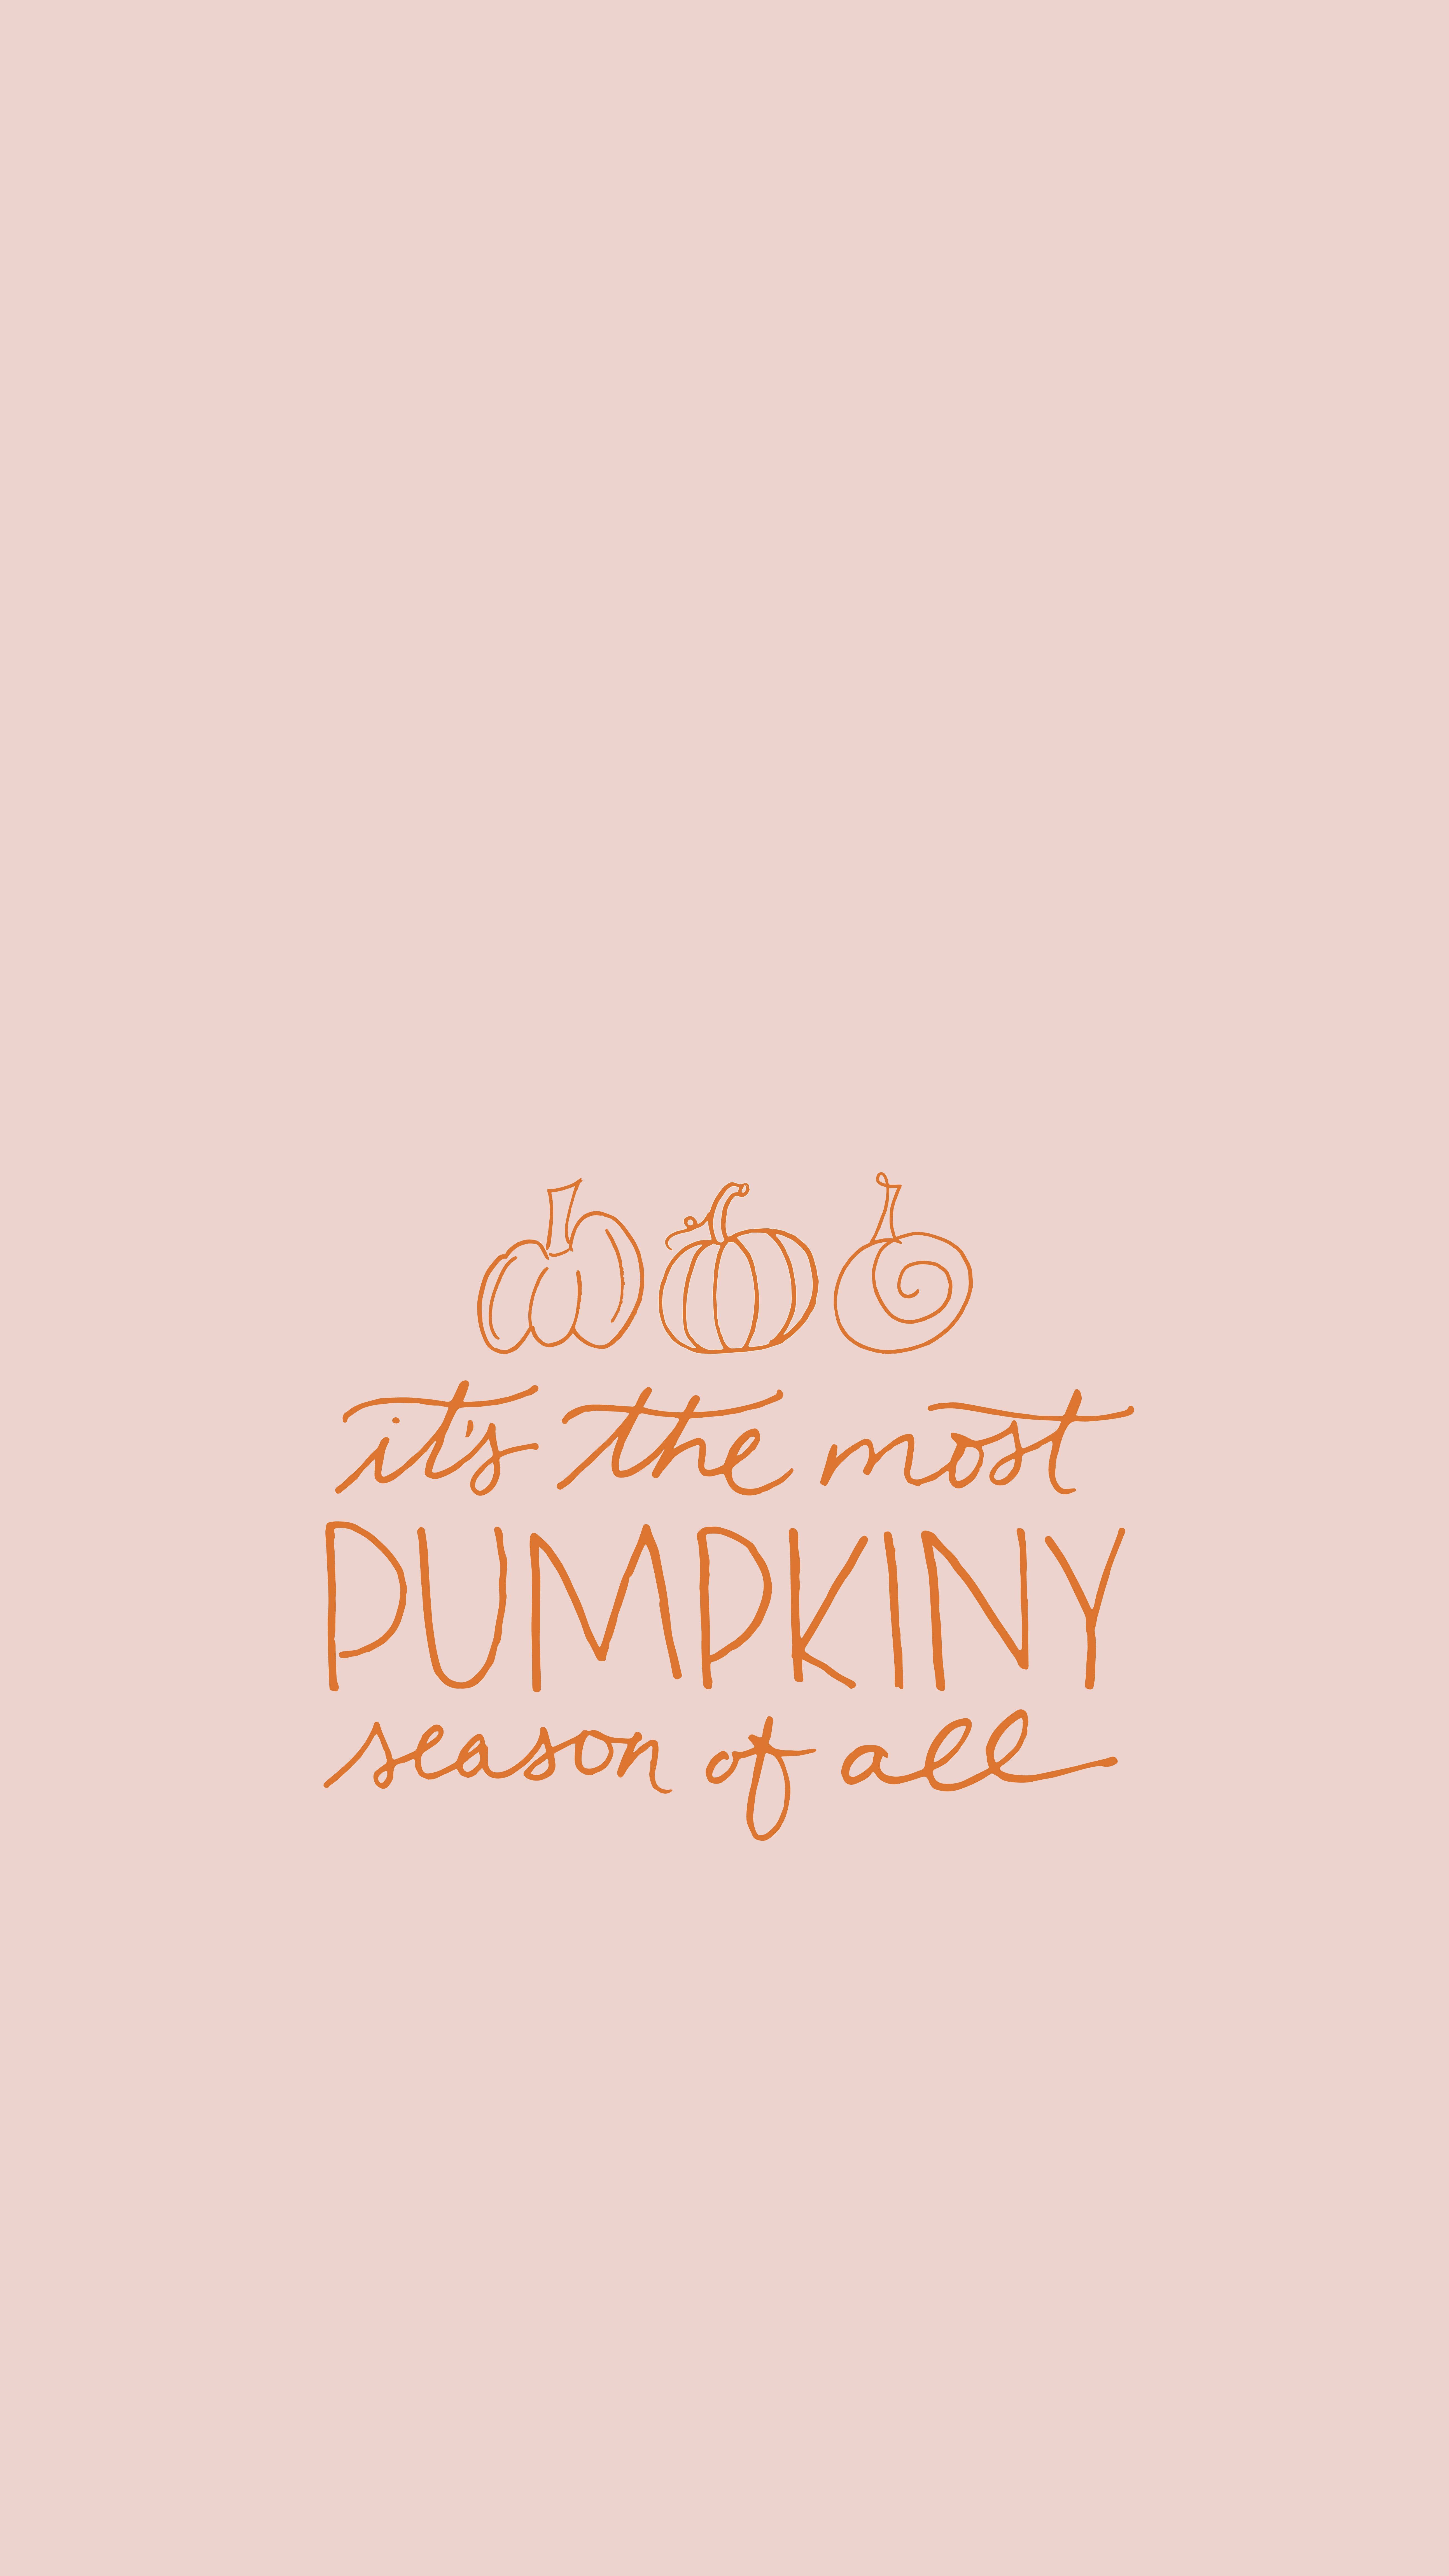 It's the most pumpkin season of all. - October